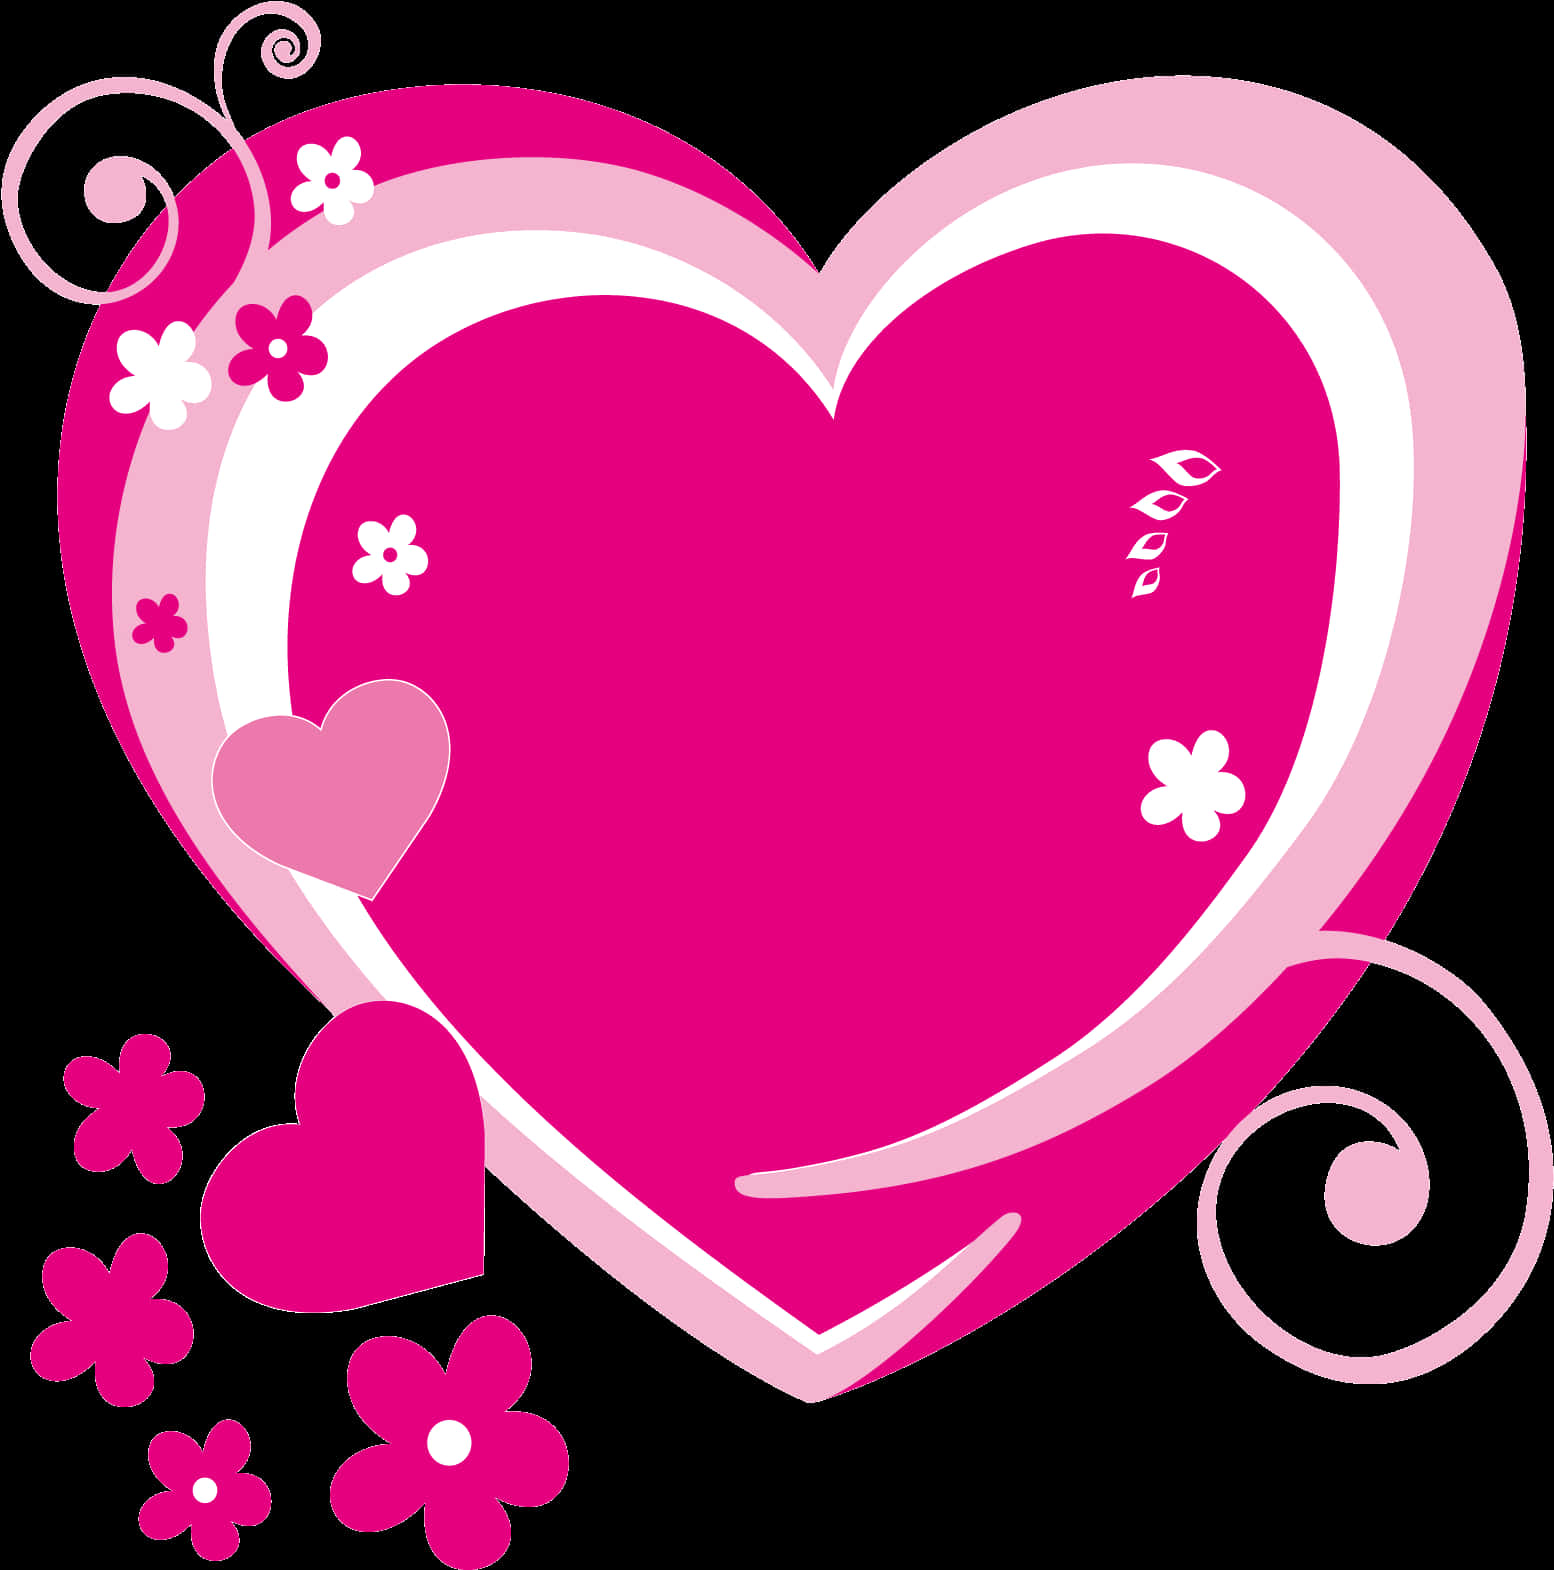 Pink Heart Clipartwith Floral Designs PNG image